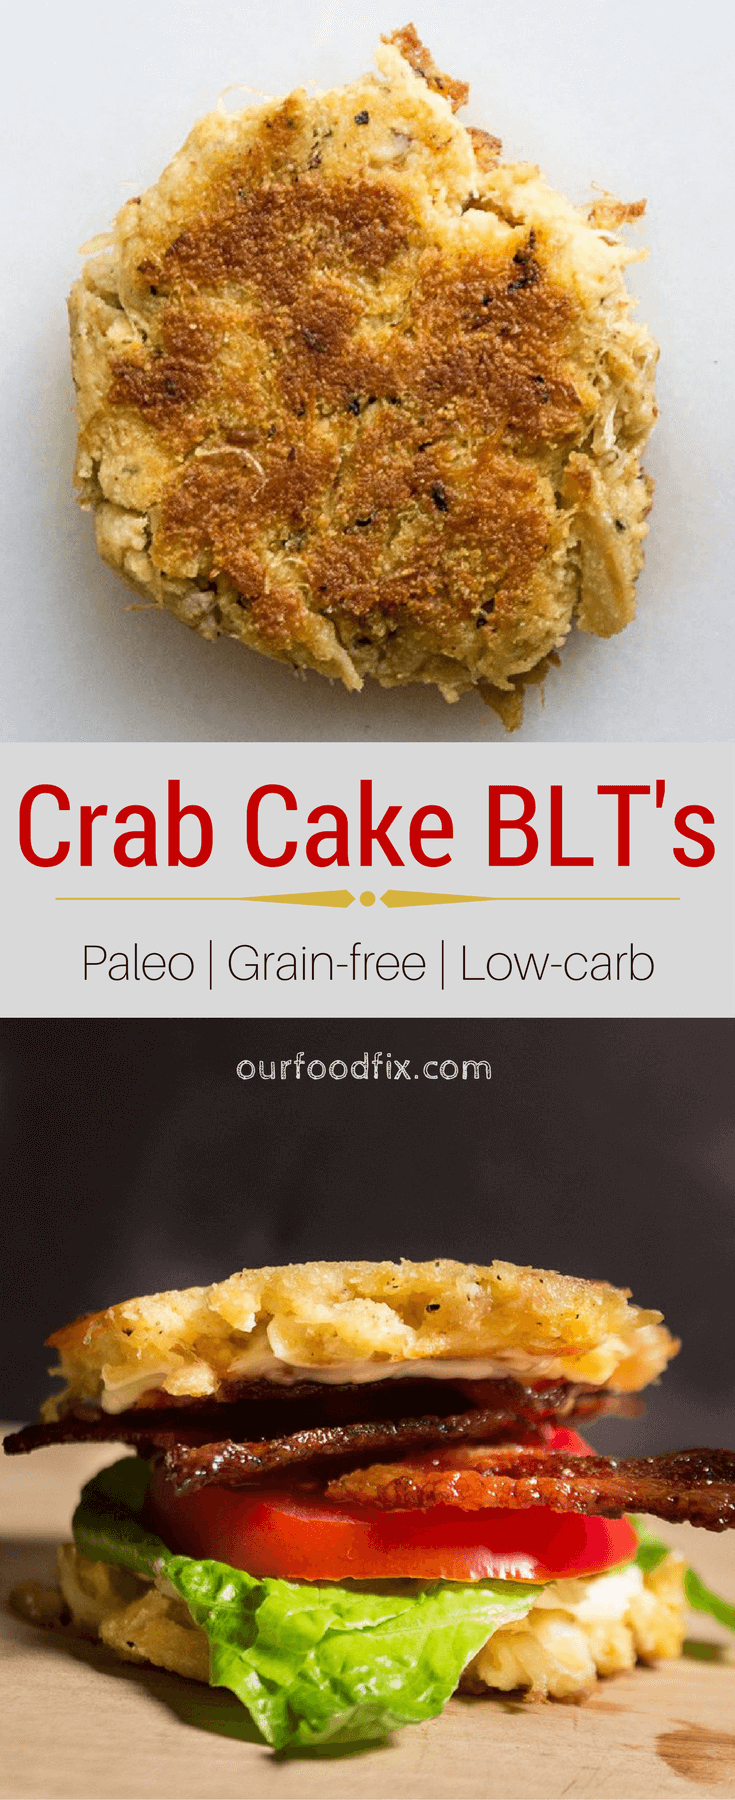 A healthy Paleo crab cake acts as the bread in this grain-free and low-carb version of a BLT. Paleo recipes | Gluten free recipes | Grain free recipes | Holiday recipes | Independence Day | BBQ | Cookout recipes | Party food | Seafood